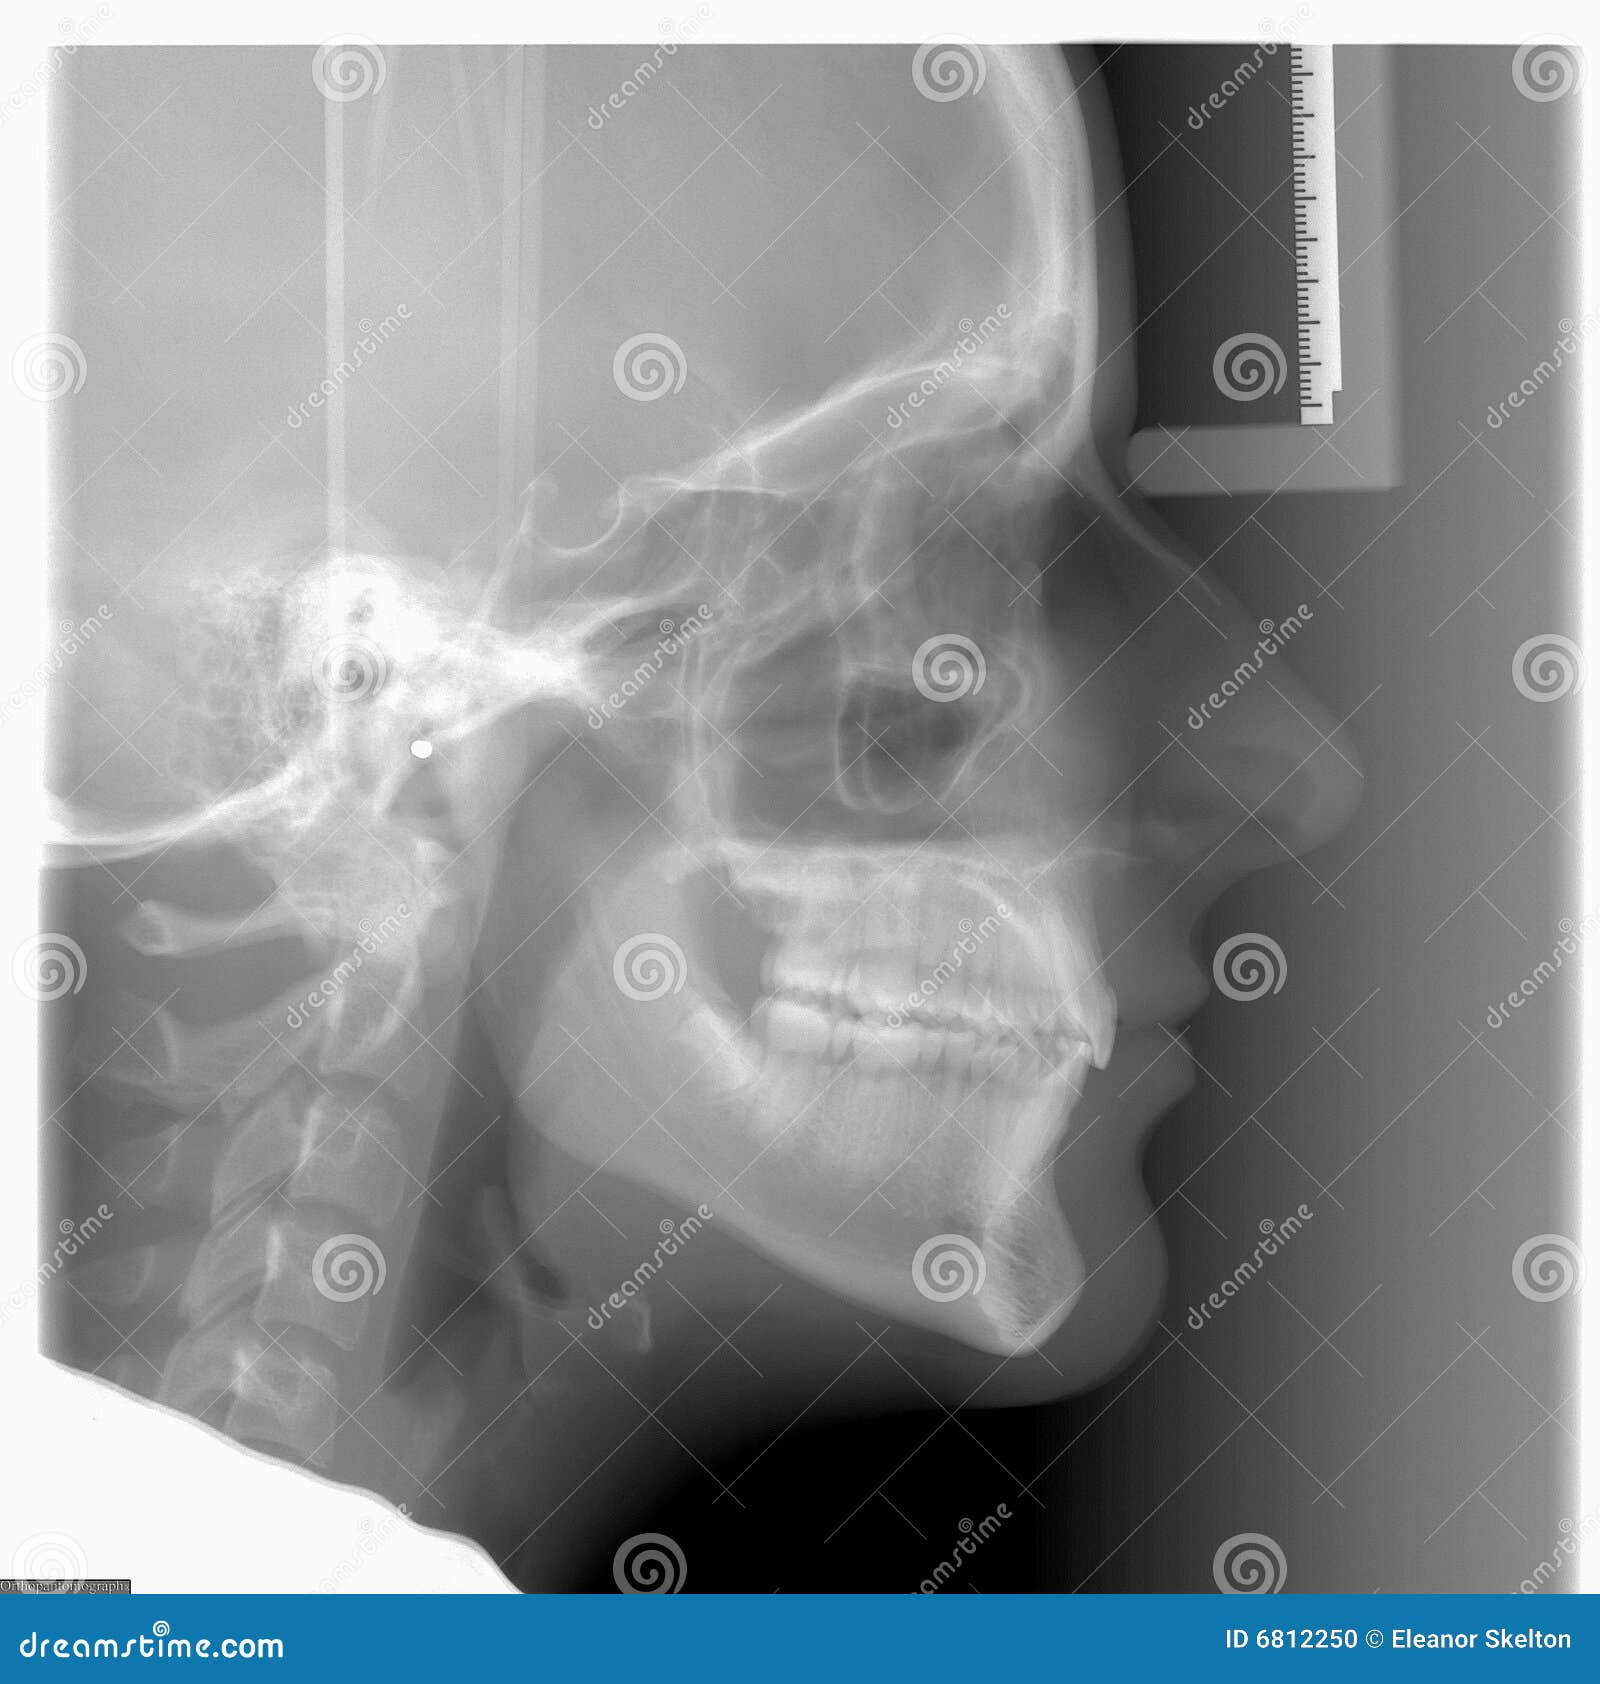 cephalometric x-ray used in dentistry and orthodontics